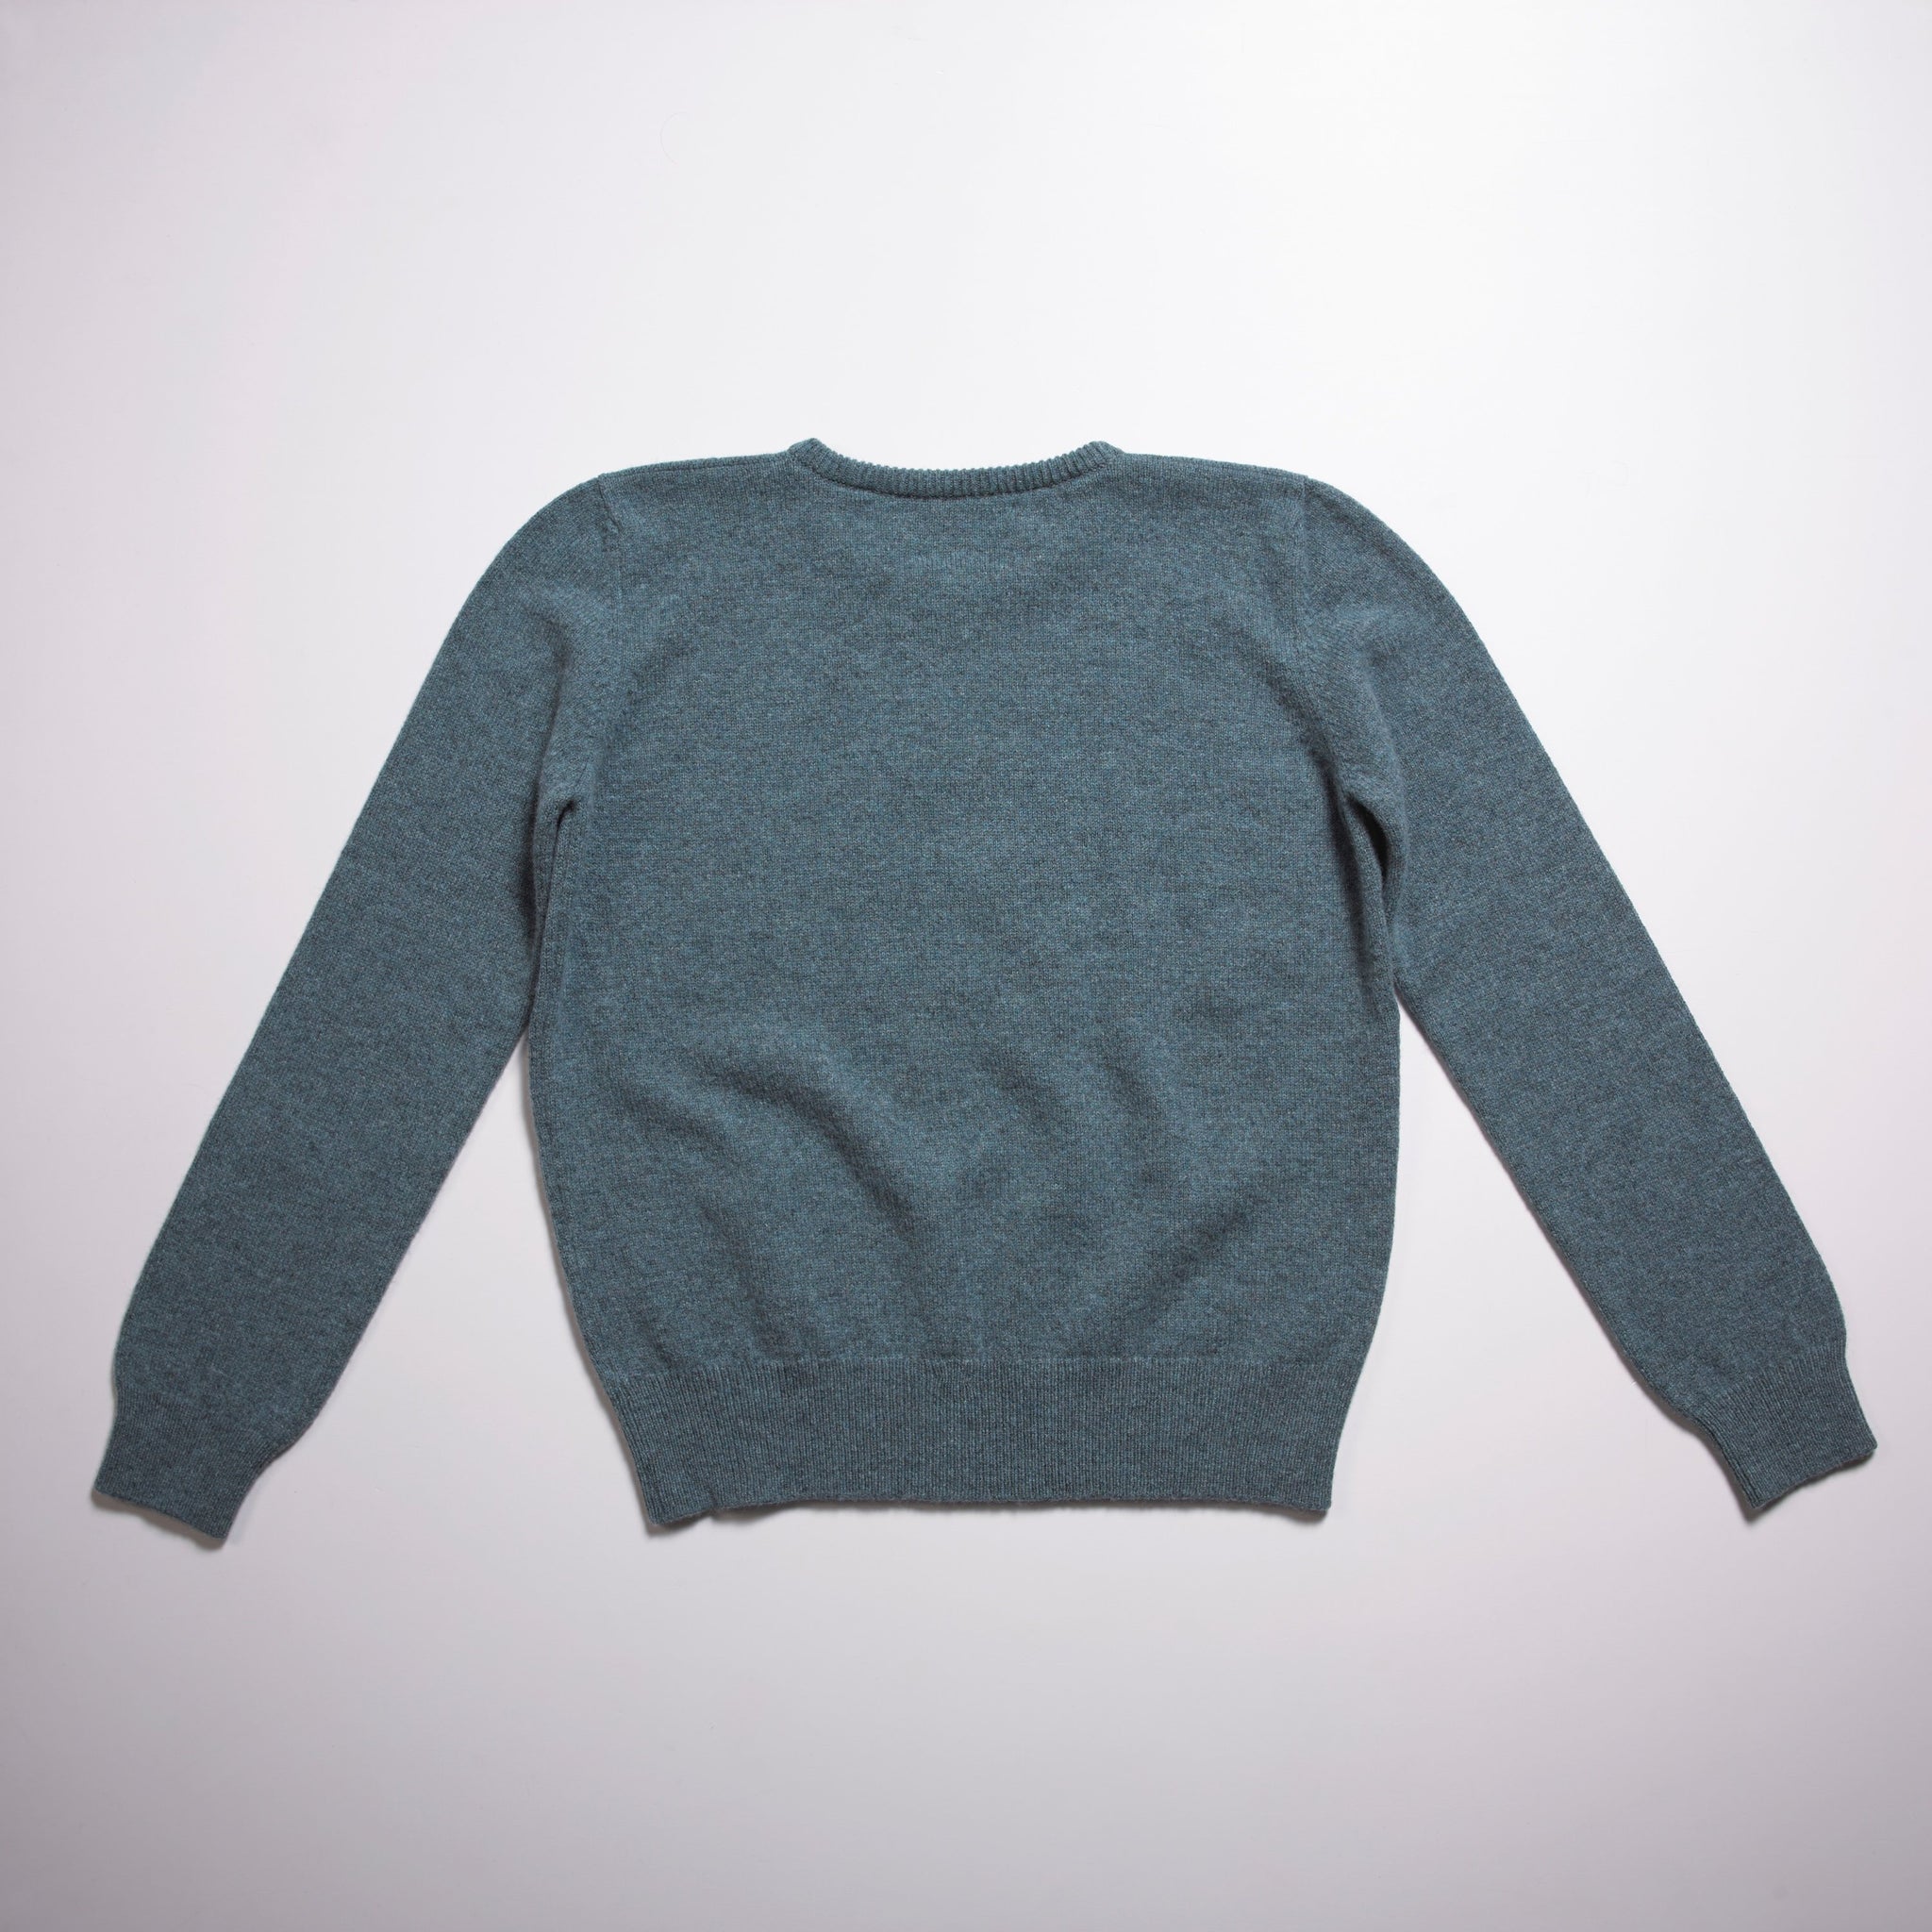 Archive - one off - Alphabet O Knit